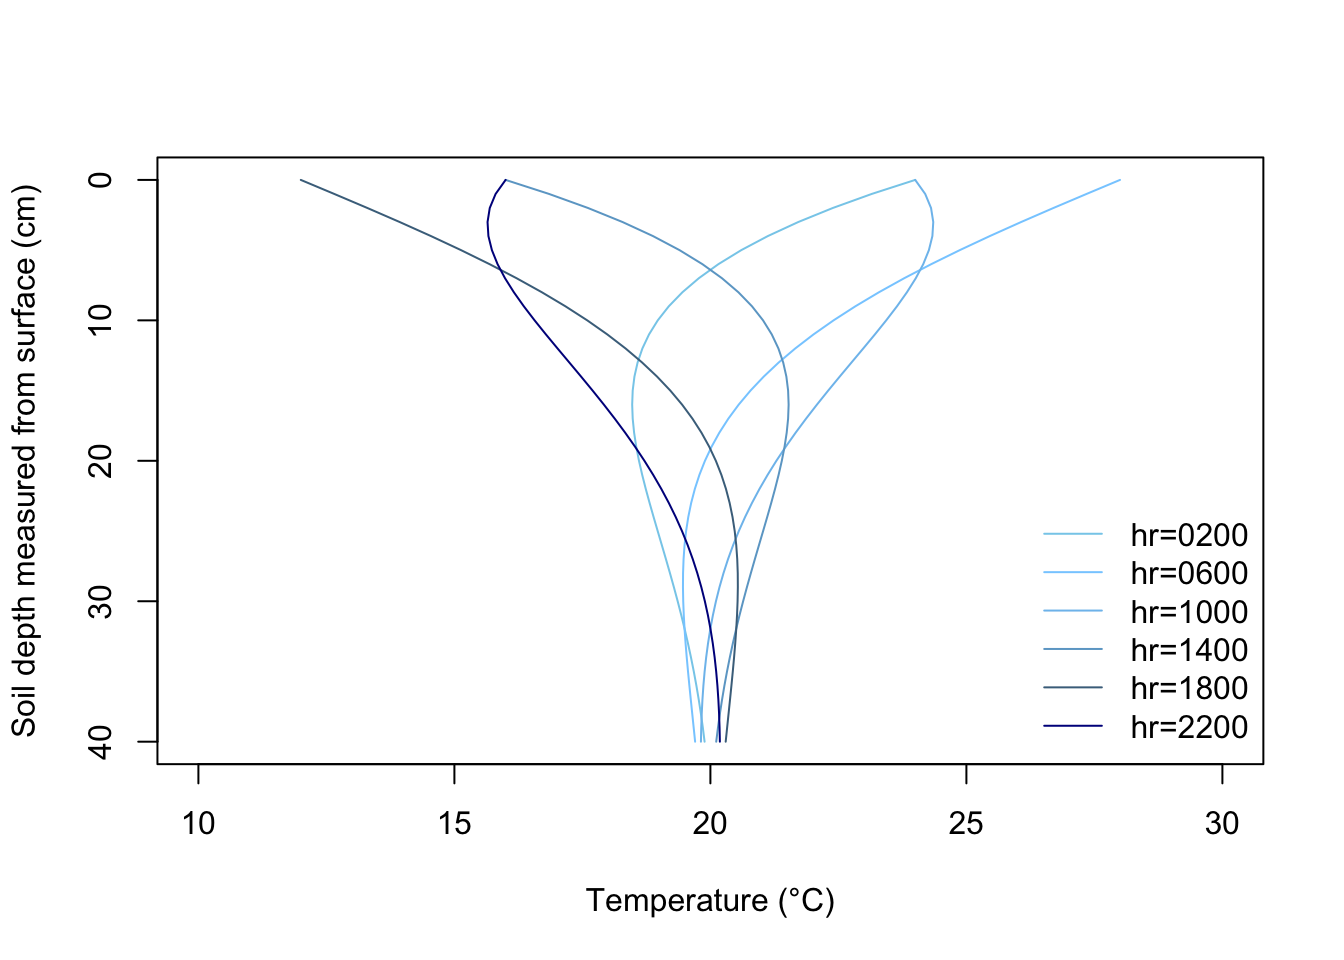 Plot of soil temperature versus depth for various times of day, derived from Equations 11 through 13. Assumed values for the various constants were D=12.2cm, $\bar T$=20°C, and A(0)=8°C.